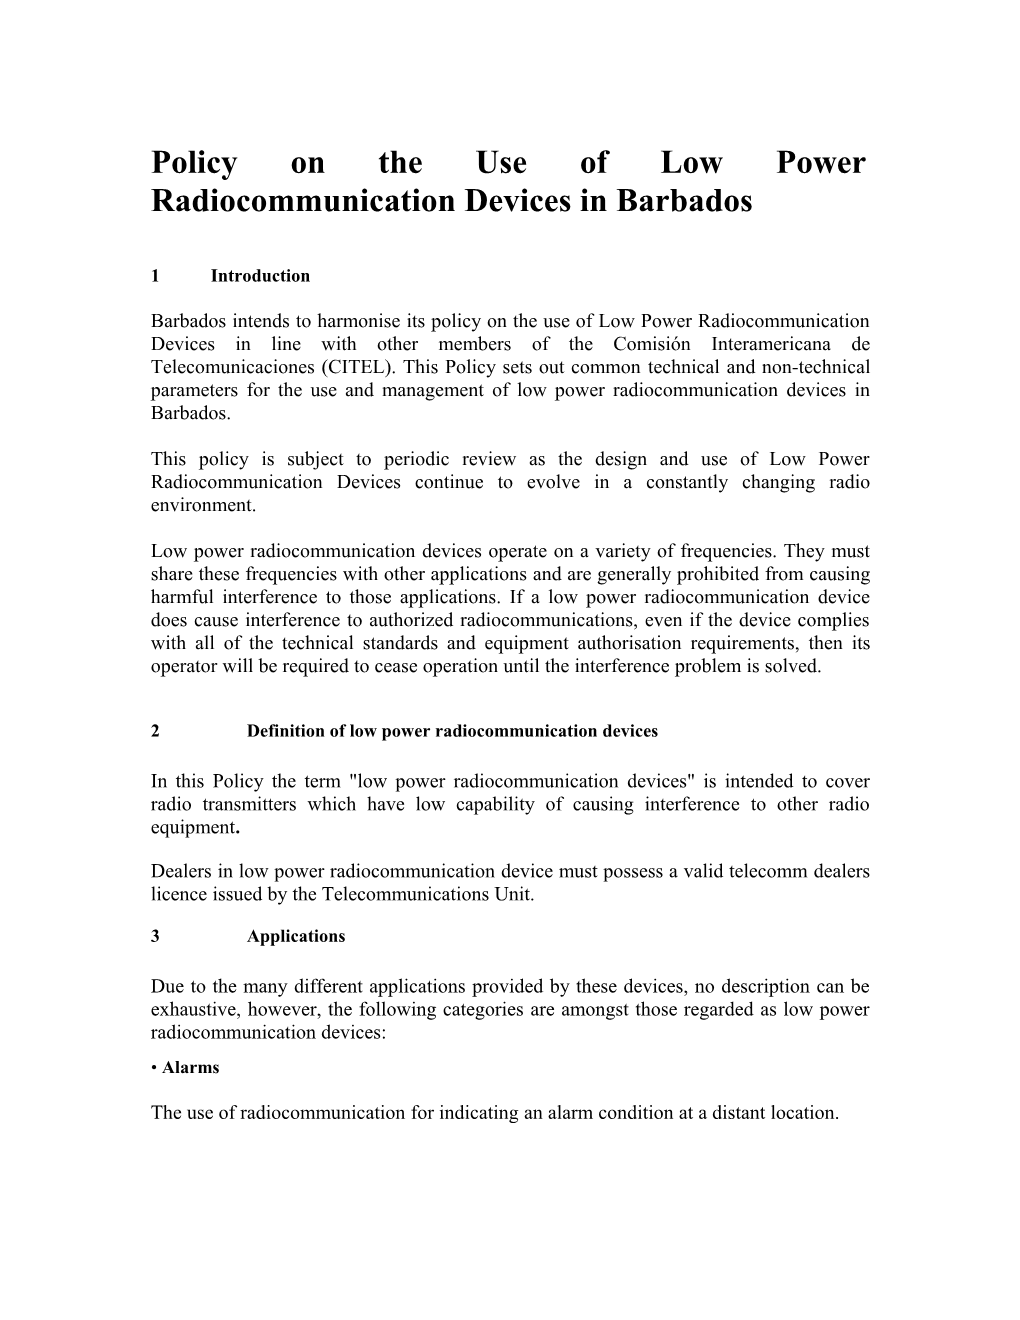 Barbados Policy on Low Power Radiocommunication Devices